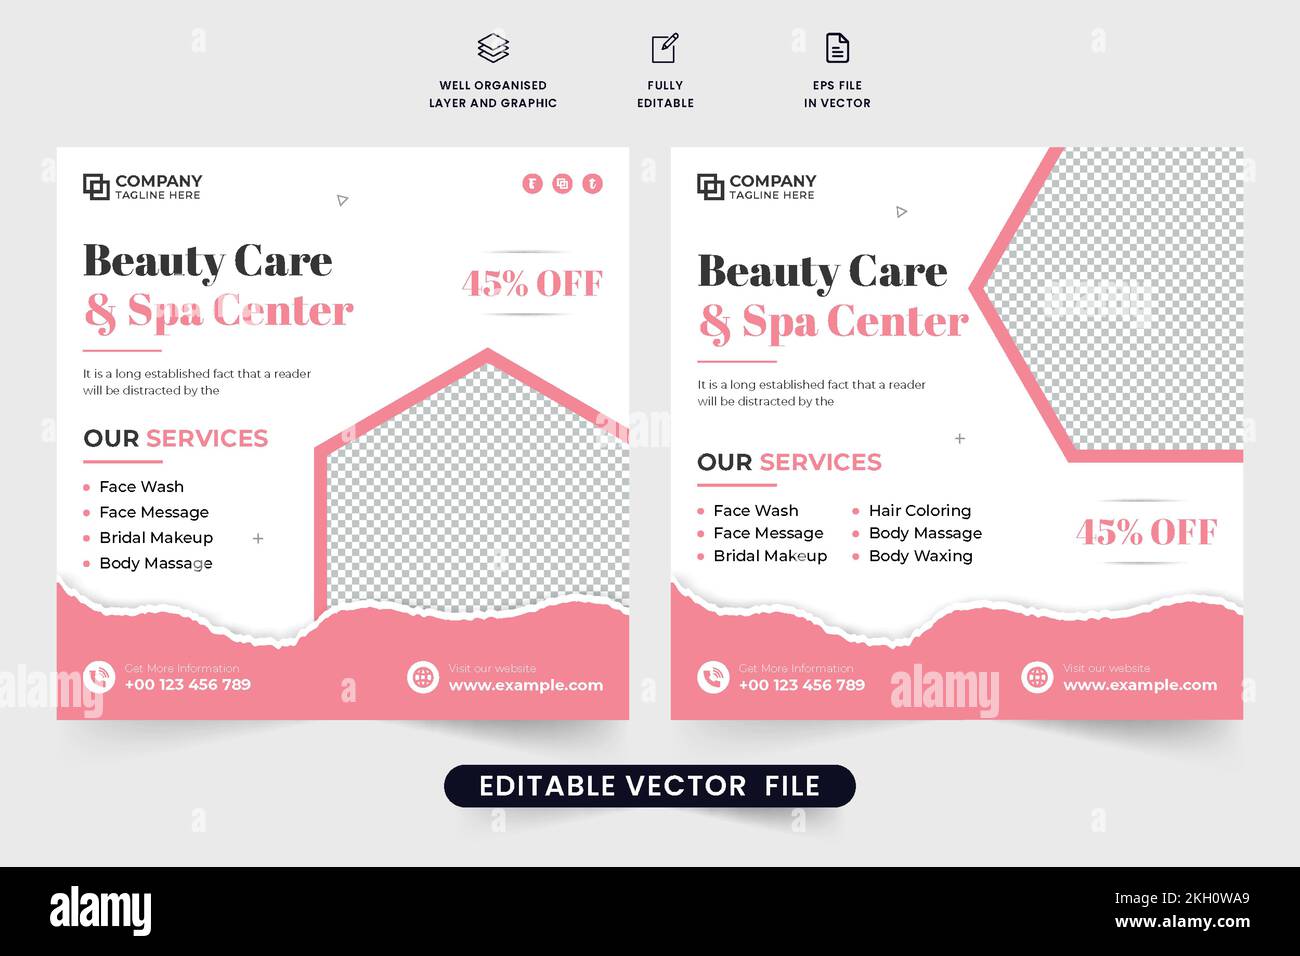 Modern spa center social media promotion template vector with pink and dark colors. Beauty care business advertisement poster design with abstract sha Stock Vector